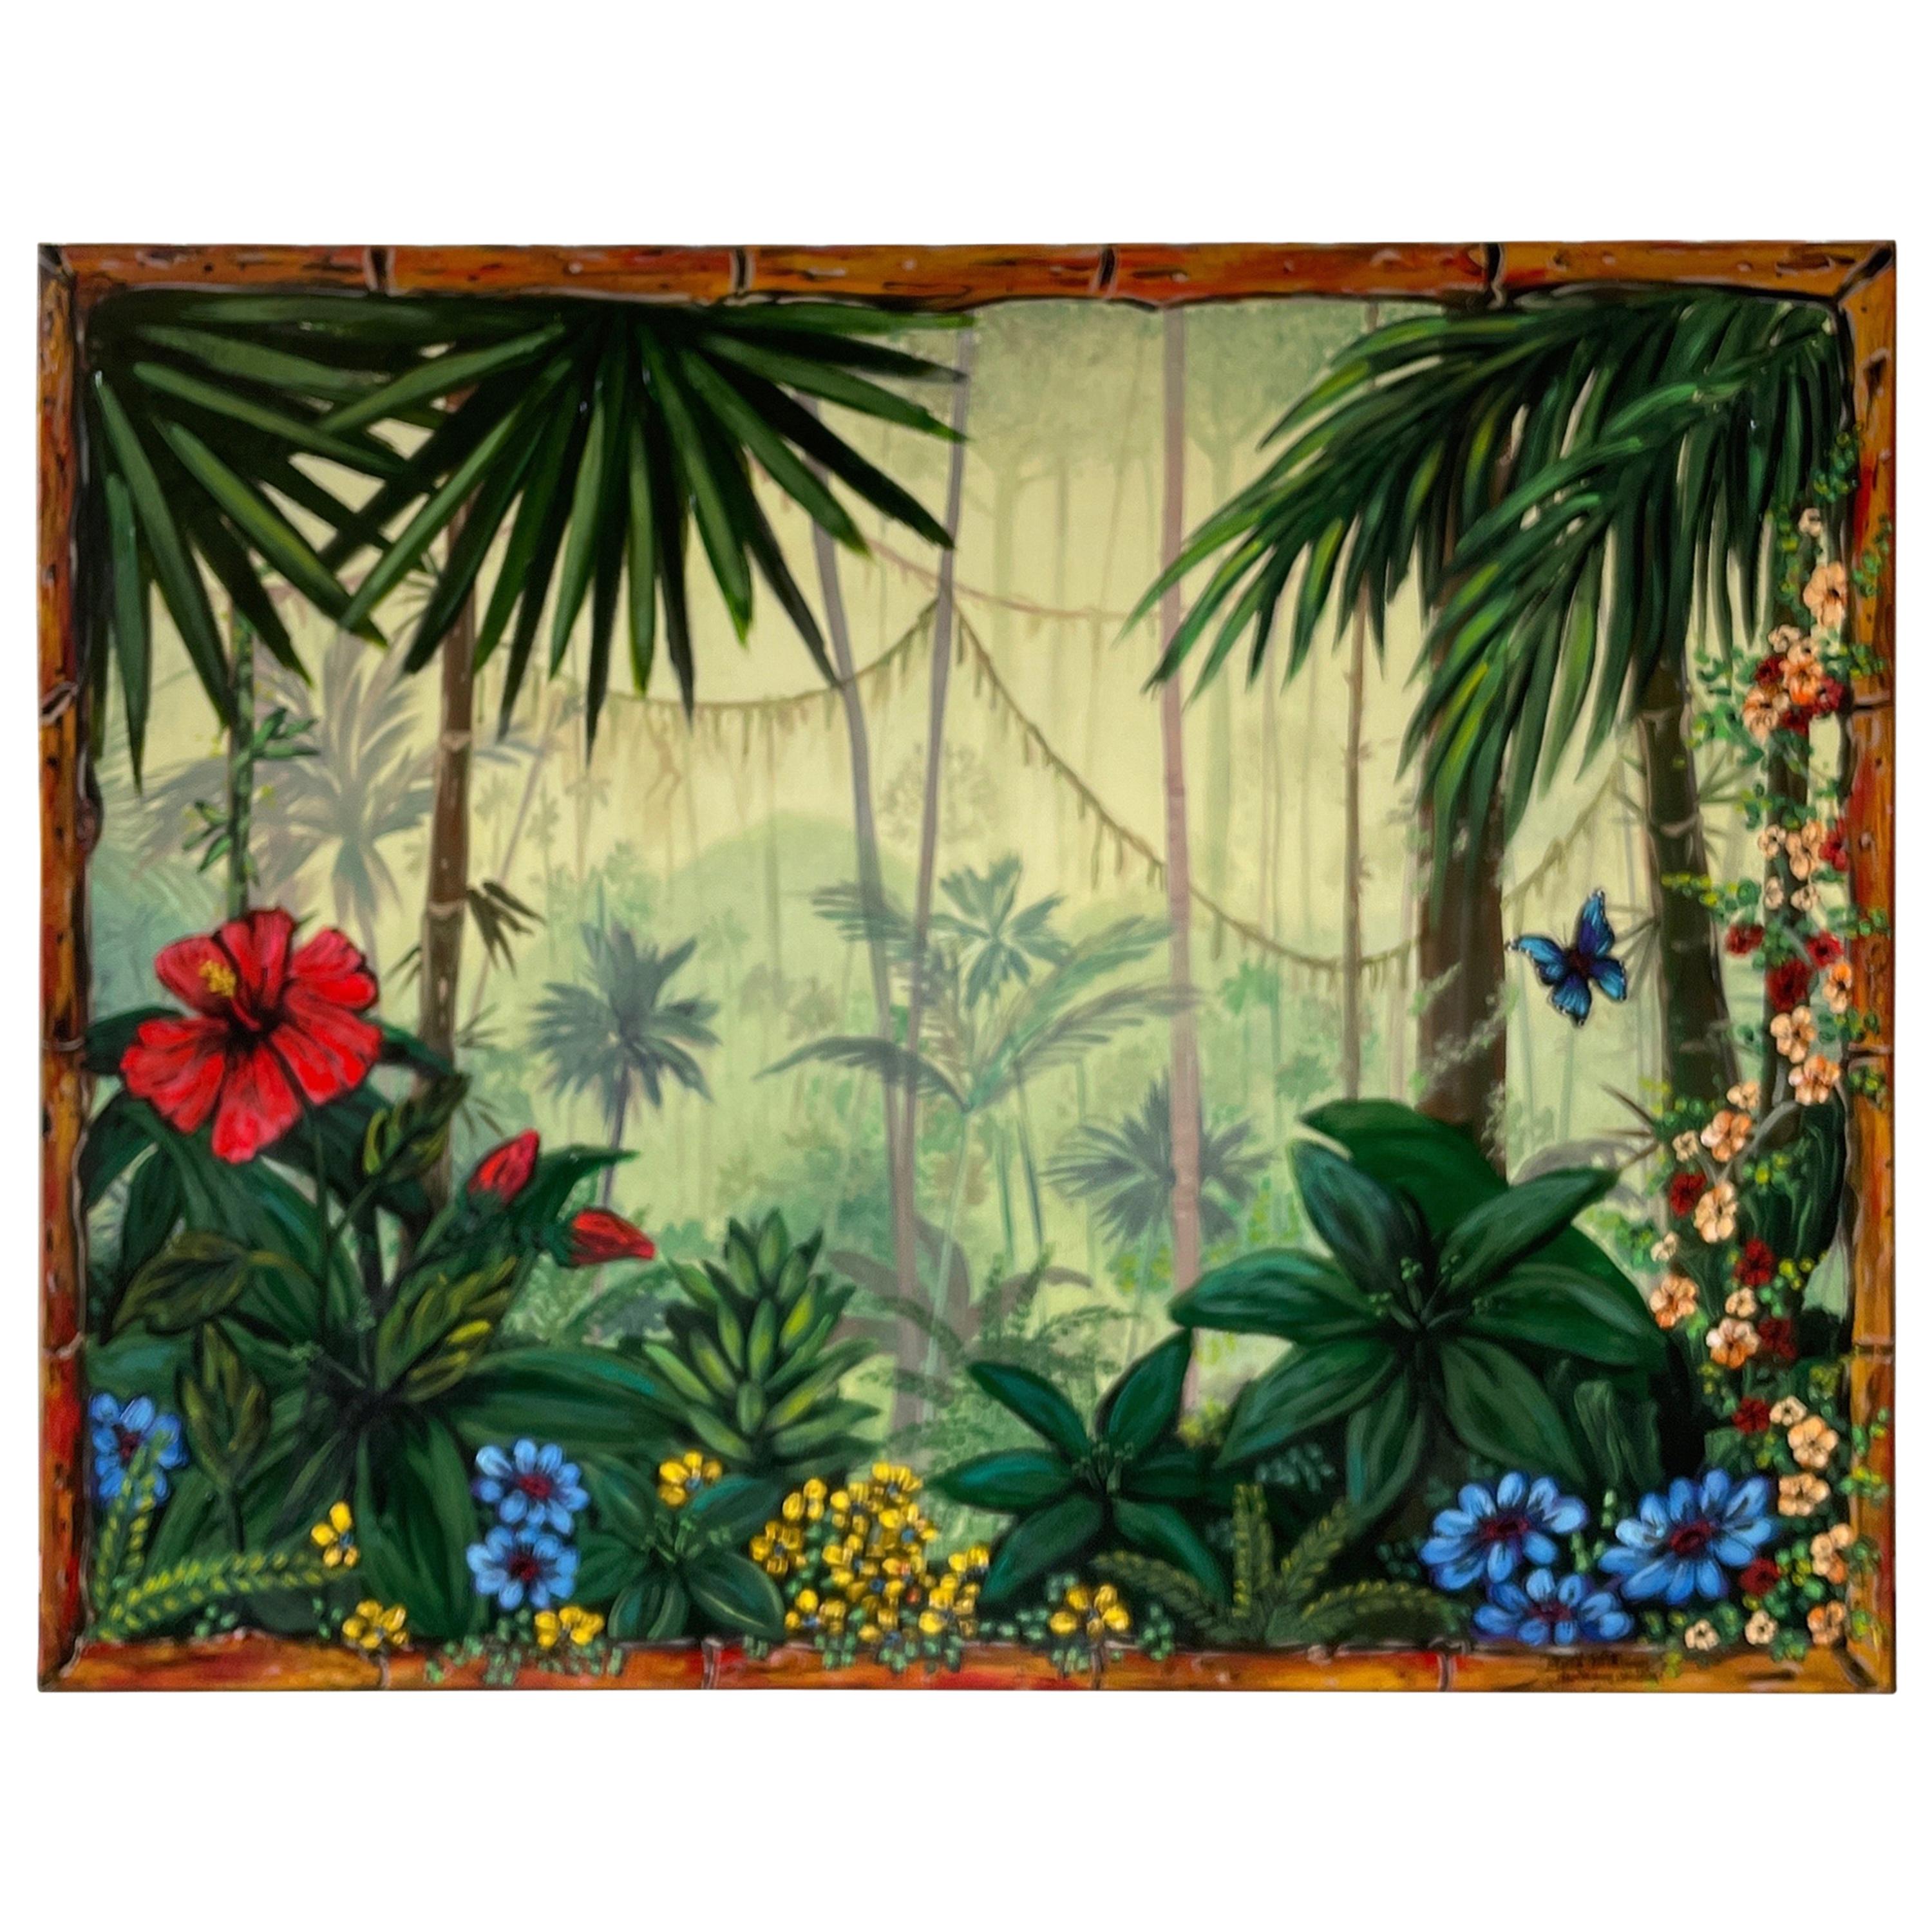 Original Oil Painting of Palm Trees & Flora For Sale